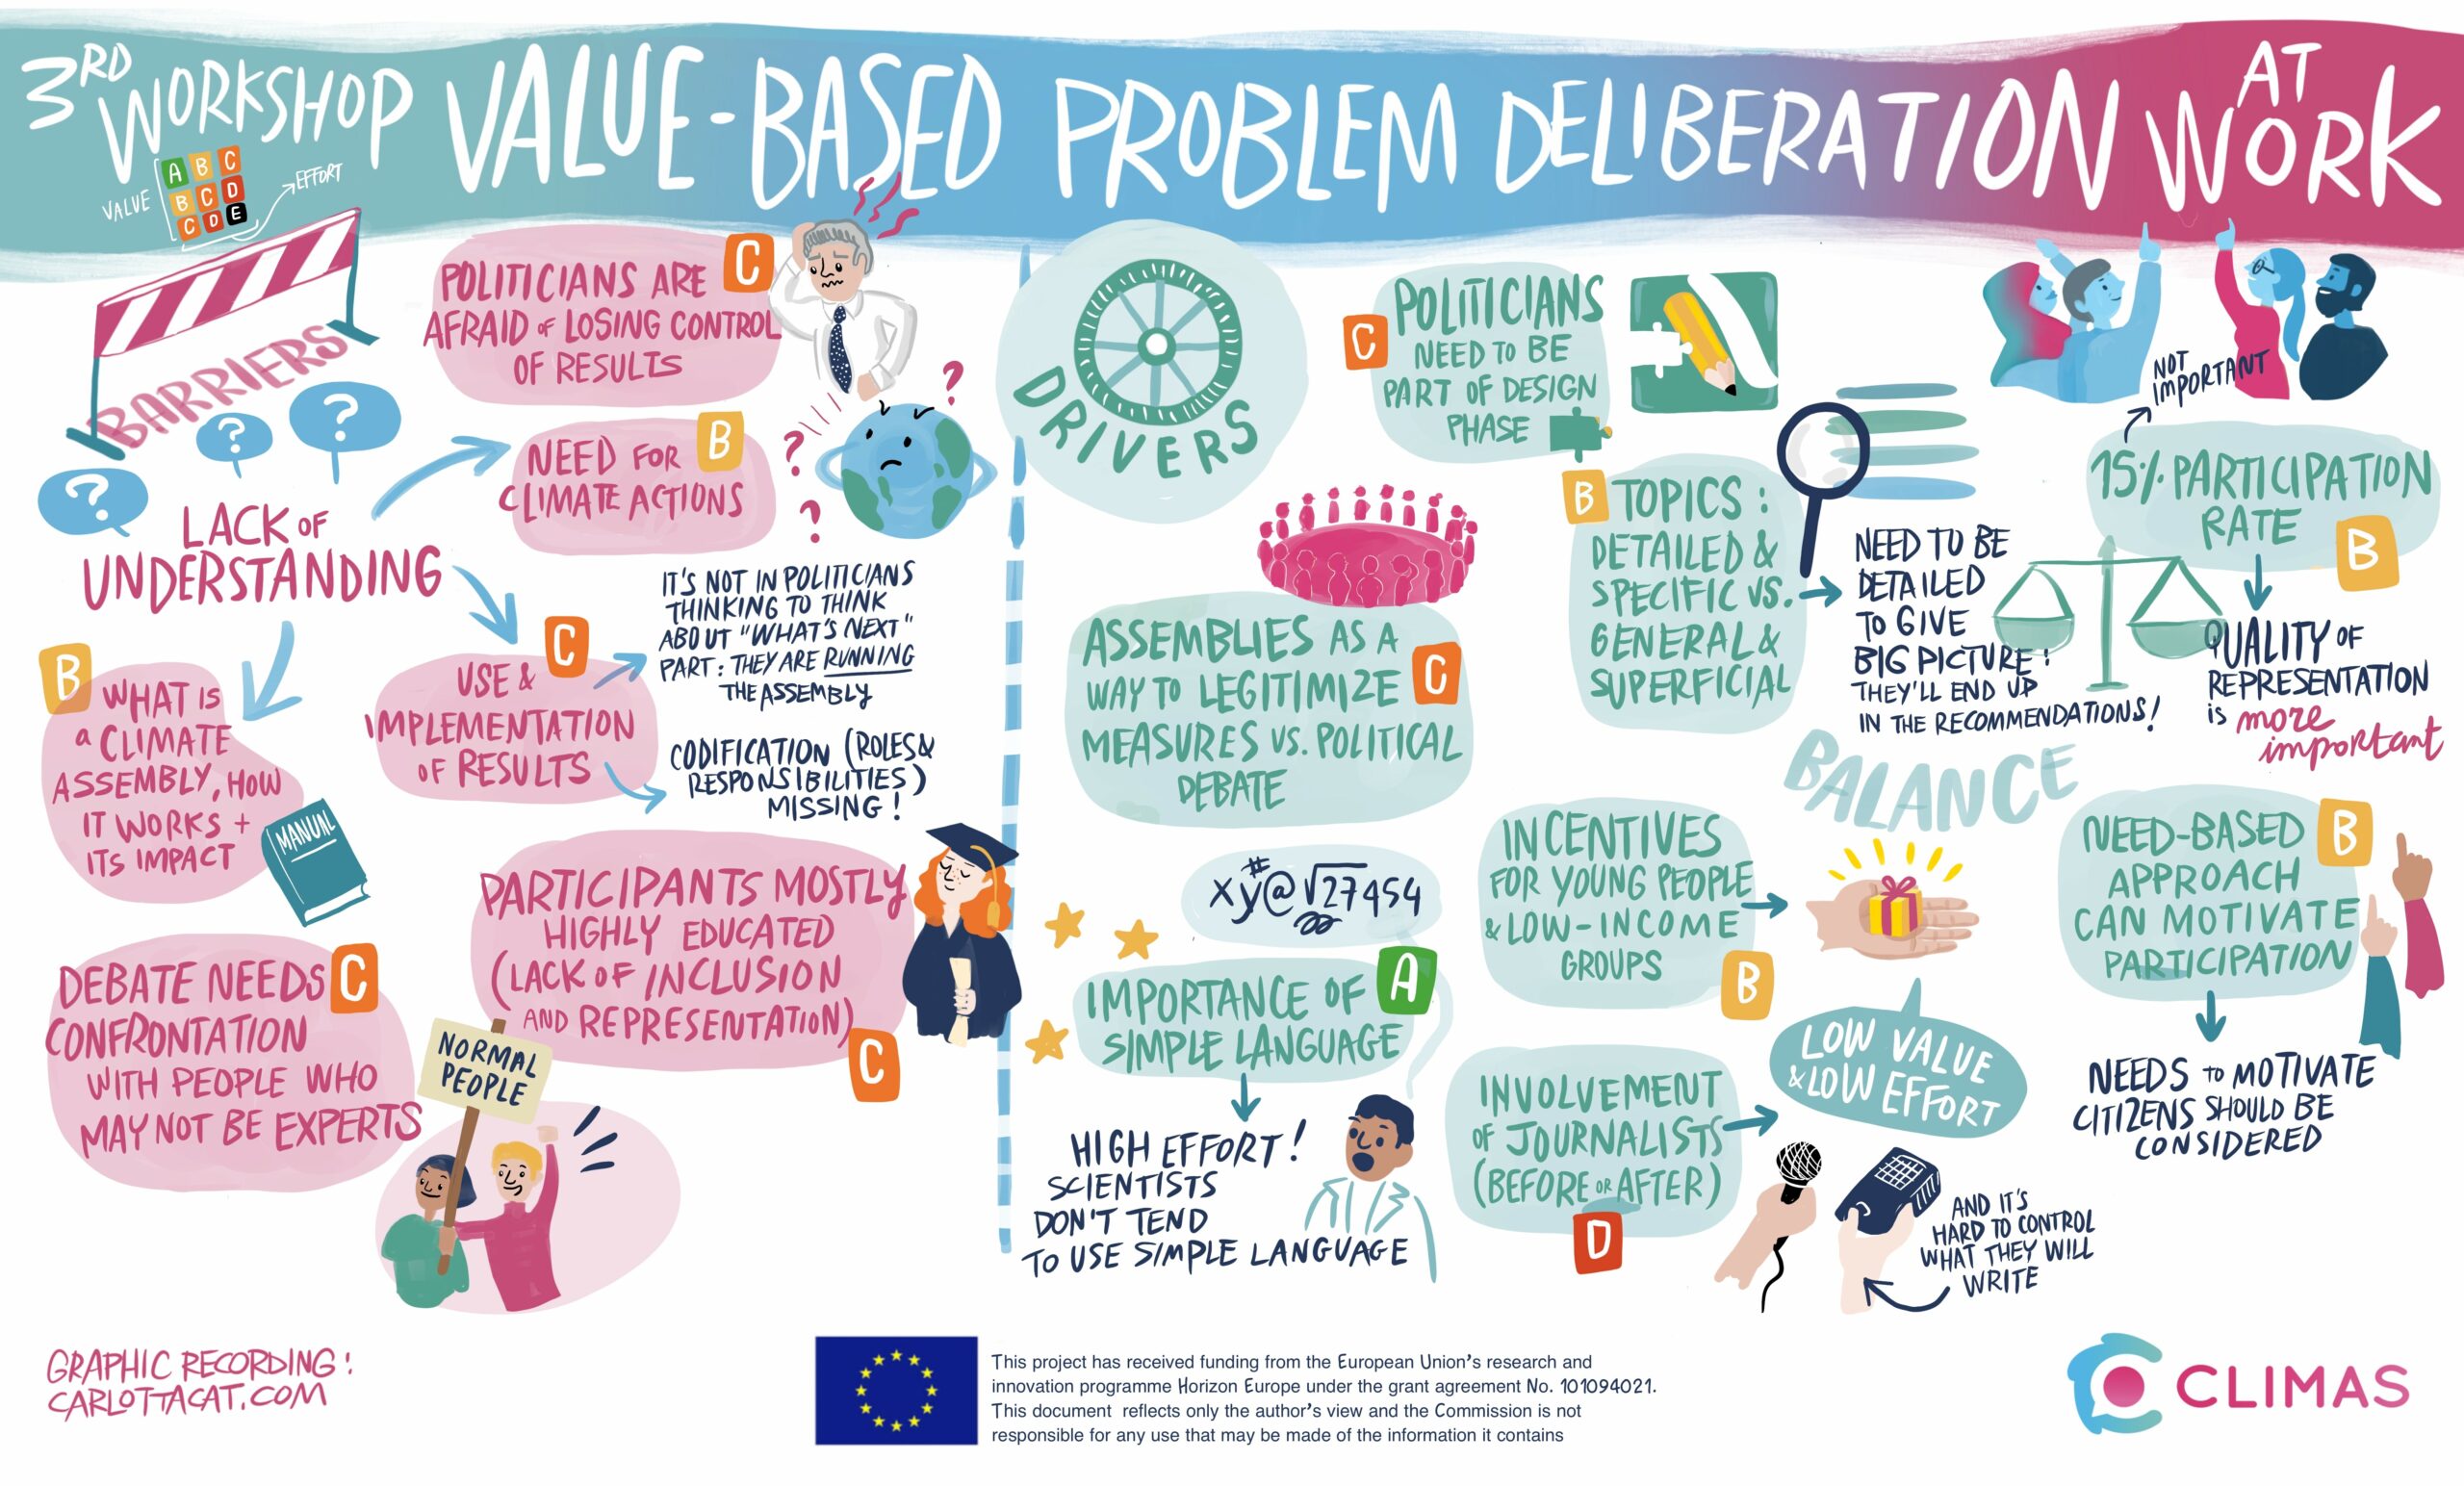 An example of the visual output of a value-based problem deliberation CLIMAS workshops